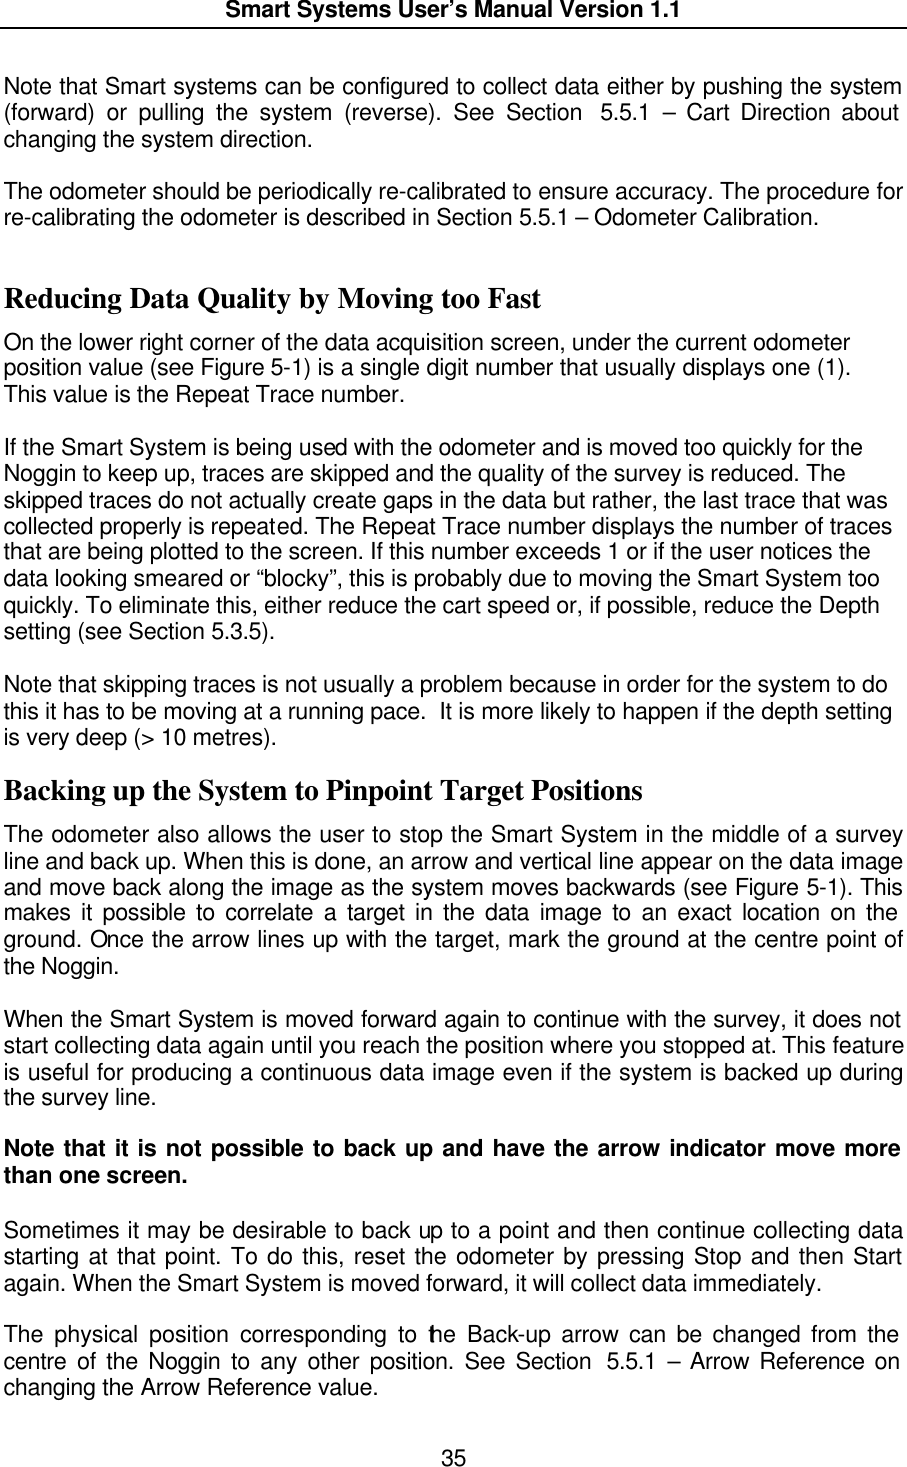  Smart Systems User’s Manual Version 1.1  35  Note that Smart systems can be configured to collect data either by pushing the system (forward) or pulling the system (reverse). See Section  5.5.1 – Cart Direction about changing the system direction.  The odometer should be periodically re-calibrated to ensure accuracy. The procedure for re-calibrating the odometer is described in Section 5.5.1 – Odometer Calibration.  Reducing Data Quality by Moving too Fast On the lower right corner of the data acquisition screen, under the current odometer position value (see Figure 5-1) is a single digit number that usually displays one (1).  This value is the Repeat Trace number.   If the Smart System is being used with the odometer and is moved too quickly for the Noggin to keep up, traces are skipped and the quality of the survey is reduced. The skipped traces do not actually create gaps in the data but rather, the last trace that was collected properly is repeated. The Repeat Trace number displays the number of traces that are being plotted to the screen. If this number exceeds 1 or if the user notices the data looking smeared or “blocky”, this is probably due to moving the Smart System too quickly. To eliminate this, either reduce the cart speed or, if possible, reduce the Depth setting (see Section 5.3.5).  Note that skipping traces is not usually a problem because in order for the system to do this it has to be moving at a running pace.  It is more likely to happen if the depth setting is very deep (&gt; 10 metres). Backing up the System to Pinpoint Target Positions The odometer also allows the user to stop the Smart System in the middle of a survey line and back up. When this is done, an arrow and vertical line appear on the data image and move back along the image as the system moves backwards (see Figure 5-1). This makes it possible to correlate a target in the data image to an exact location on the ground. Once the arrow lines up with the target, mark the ground at the centre point of the Noggin.  When the Smart System is moved forward again to continue with the survey, it does not start collecting data again until you reach the position where you stopped at. This feature is useful for producing a continuous data image even if the system is backed up during the survey line.   Note that it is not possible to back up and have the arrow indicator move more than one screen.  Sometimes it may be desirable to back up to a point and then continue collecting data starting at that point. To do this, reset the odometer by pressing Stop and then Start again. When the Smart System is moved forward, it will collect data immediately.  The physical position corresponding to the Back-up arrow can be changed from the centre of the Noggin to any other position. See Section  5.5.1 – Arrow Reference on changing the Arrow Reference value. 